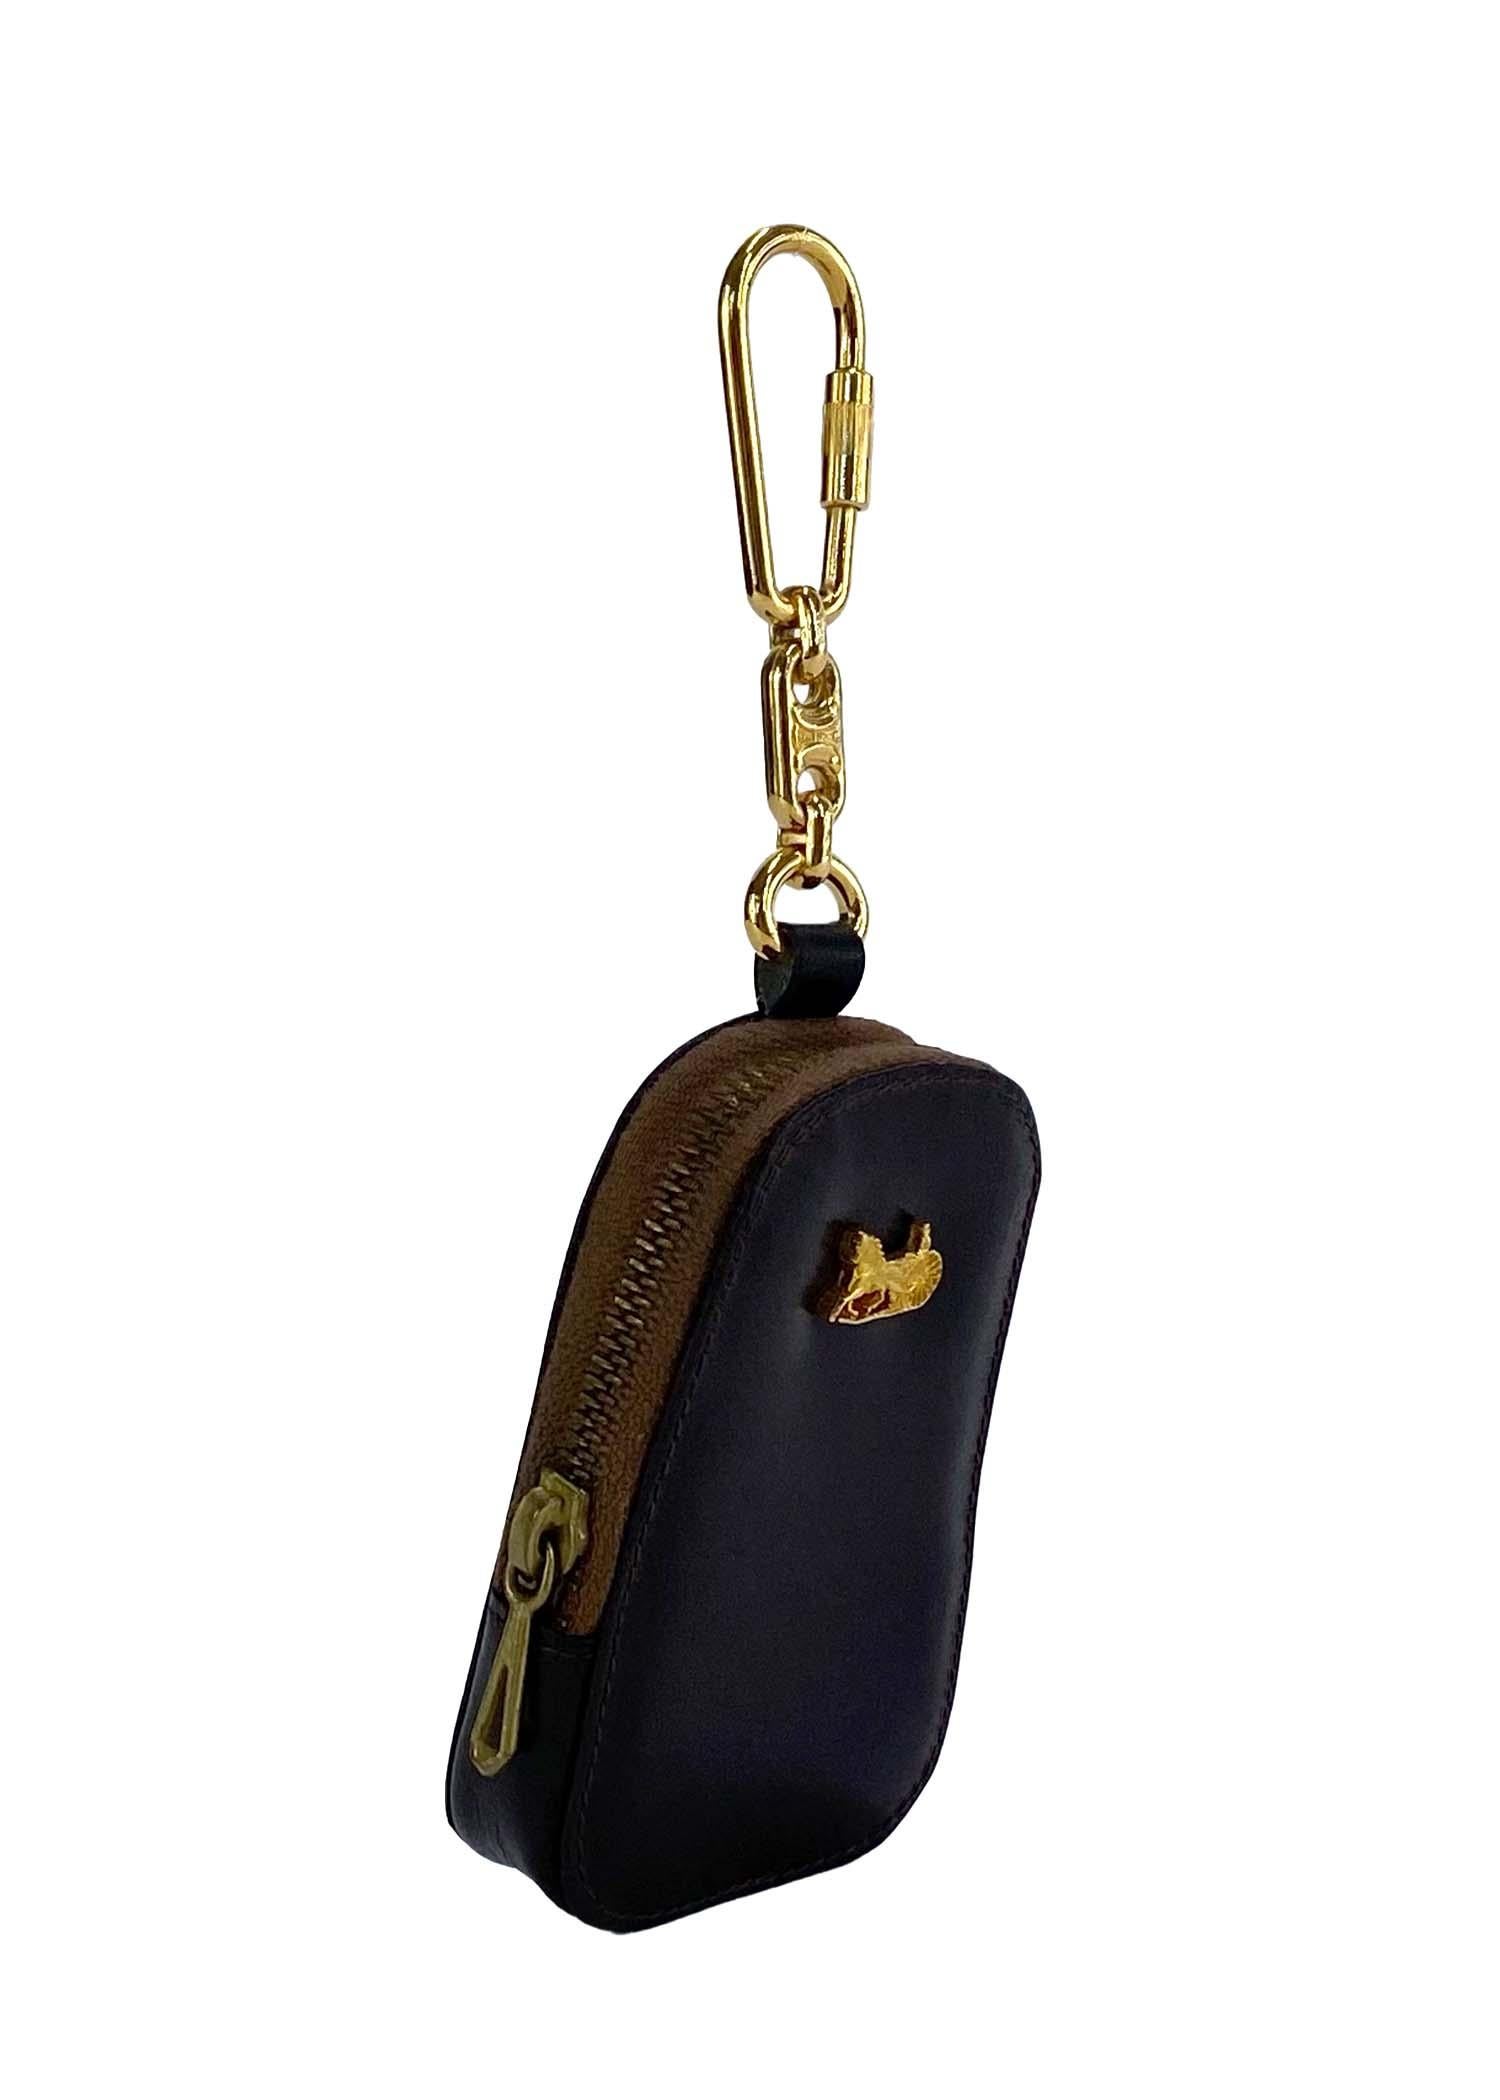 TheReallist presents: an adorable vintage Celine key chain pouchette with its original box. From the 1970s, this keychain/bag charm features a brown leather pouch with a gold chain and Celine logo accents. 

Follow us on Instagram! @_the_reallist_